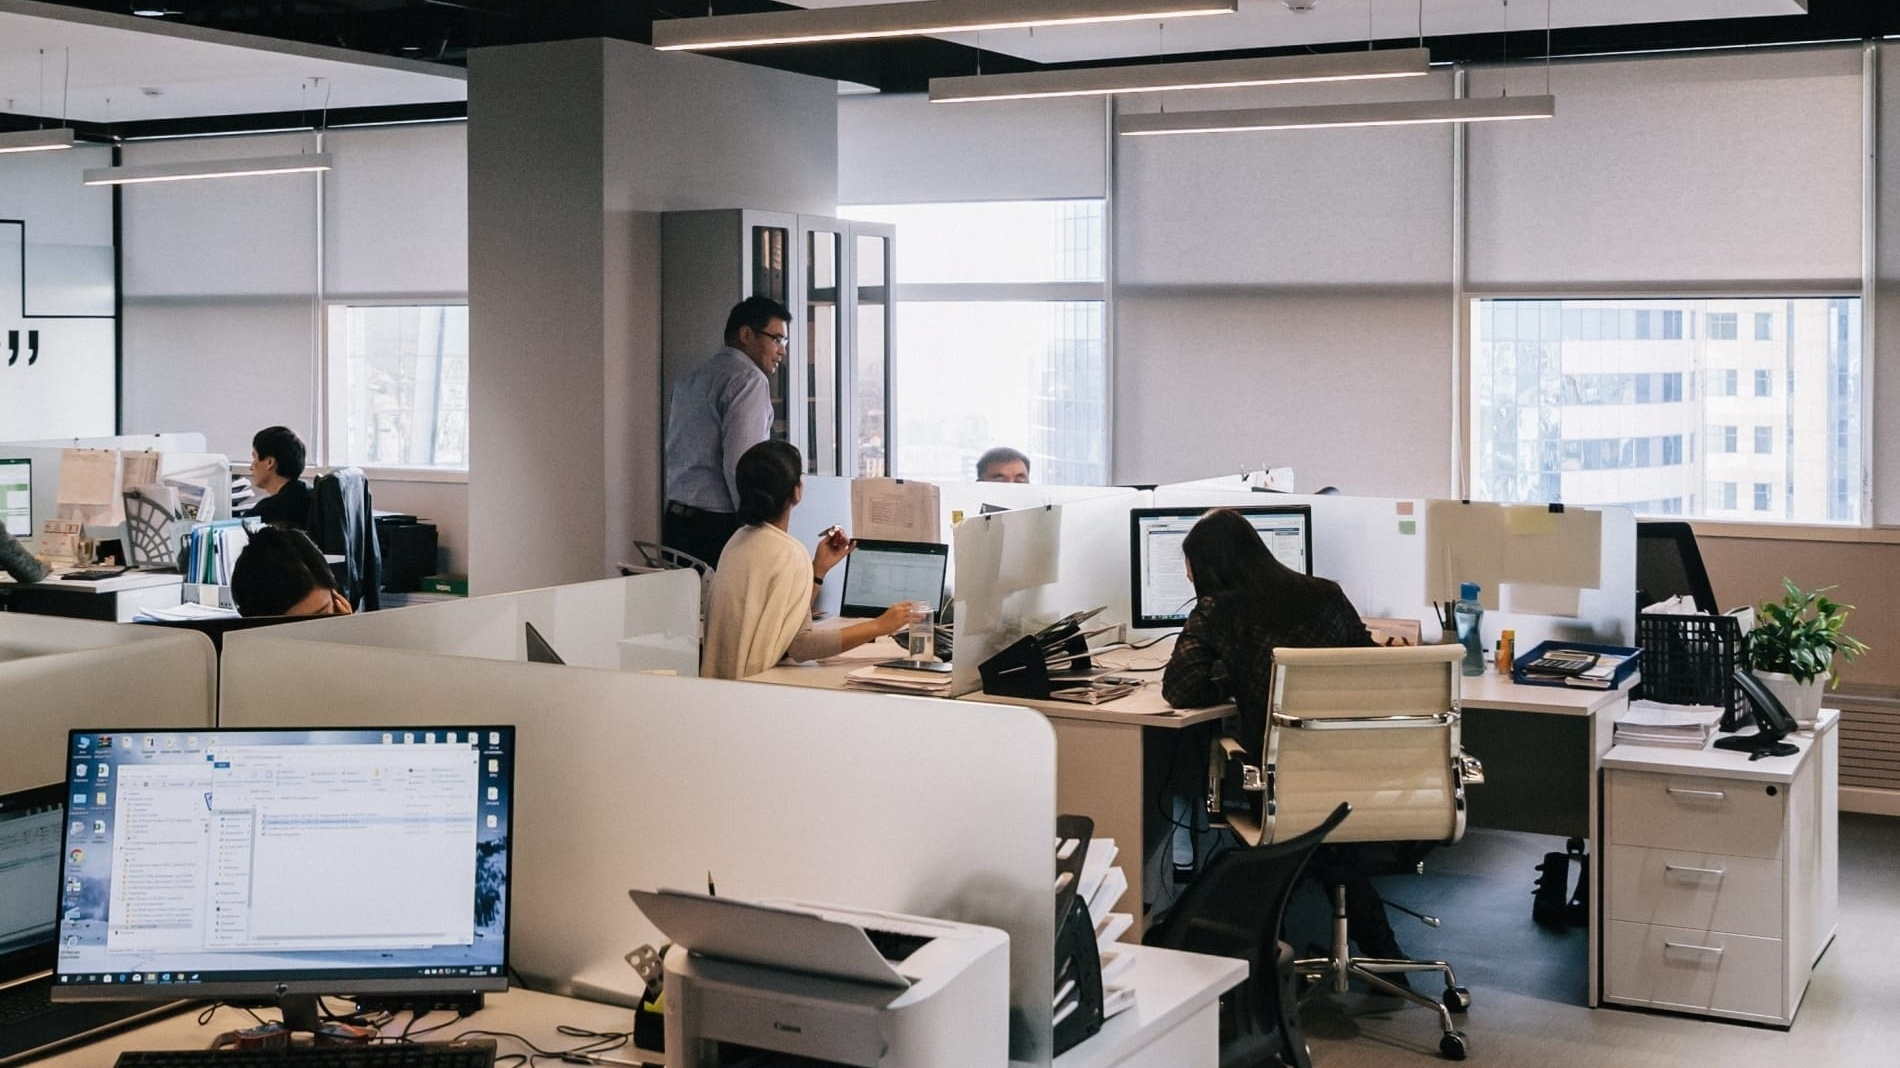 White themed office with workers and computers in cubicles